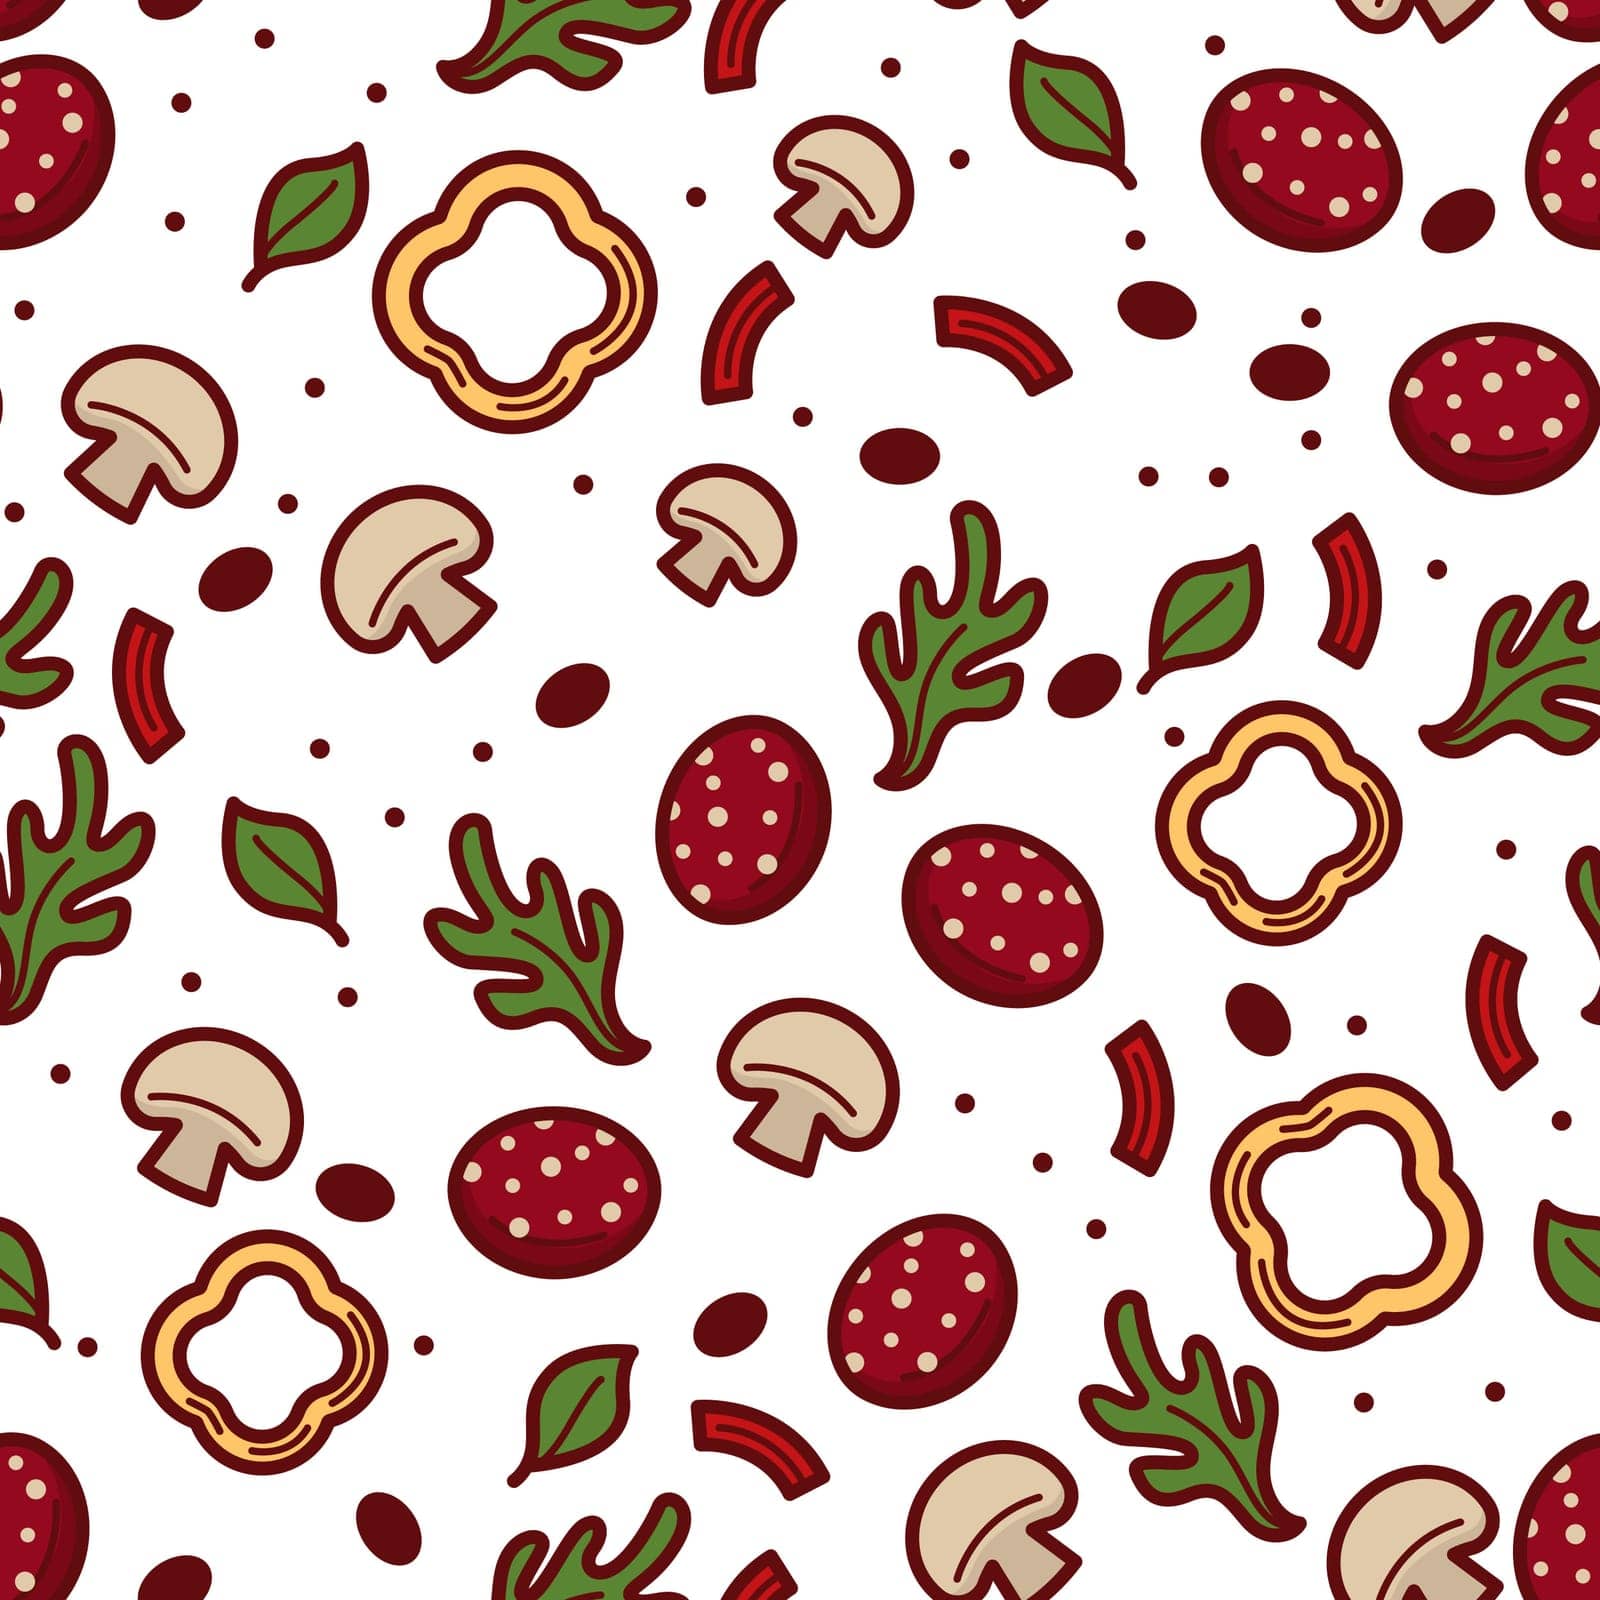 Mushroom and pepper, herbs and spices pattern by Sonulkaster